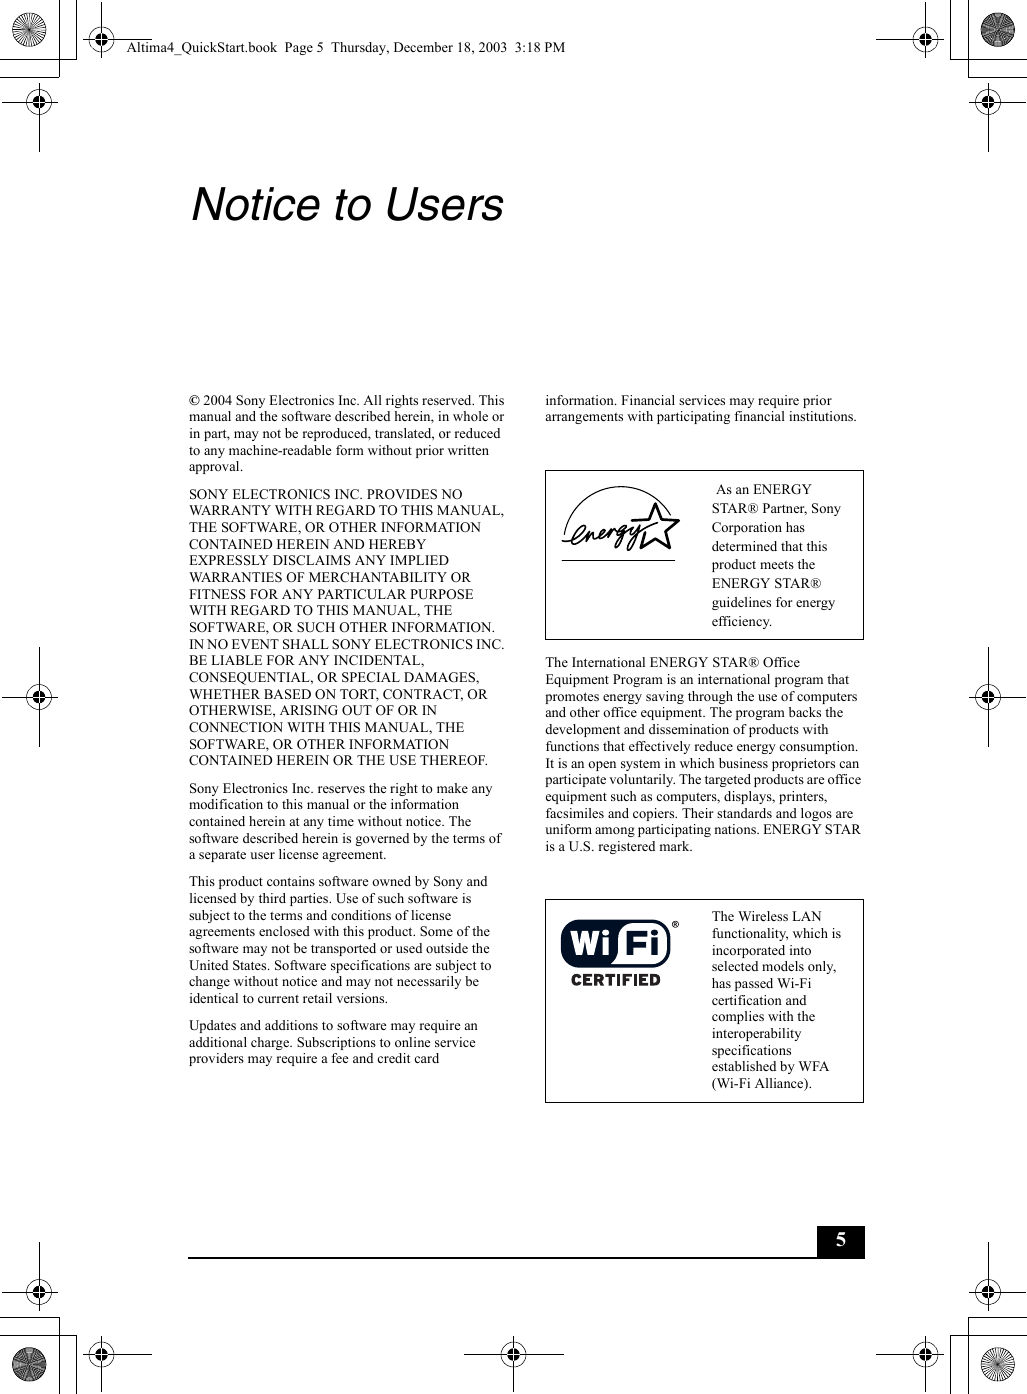 5Notice to Users© 2004 Sony Electronics Inc. All rights reserved. This manual and the software described herein, in whole or in part, may not be reproduced, translated, or reduced to any machine-readable form without prior written approval.SONY ELECTRONICS INC. PROVIDES NO WARRANTY WITH REGARD TO THIS MANUAL, THE SOFTWARE, OR OTHER INFORMATION CONTAINED HEREIN AND HEREBY EXPRESSLY DISCLAIMS ANY IMPLIED WARRANTIES OF MERCHANTABILITY OR FITNESS FOR ANY PARTICULAR PURPOSE WITH REGARD TO THIS MANUAL, THE SOFTWARE, OR SUCH OTHER INFORMATION. IN NO EVENT SHALL SONY ELECTRONICS INC. BE LIABLE FOR ANY INCIDENTAL, CONSEQUENTIAL, OR SPECIAL DAMAGES, WHETHER BASED ON TORT, CONTRACT, OR OTHERWISE, ARISING OUT OF OR IN CONNECTION WITH THIS MANUAL, THE SOFTWARE, OR OTHER INFORMATION CONTAINED HEREIN OR THE USE THEREOF.Sony Electronics Inc. reserves the right to make any modification to this manual or the information contained herein at any time without notice. The software described herein is governed by the terms of a separate user license agreement.This product contains software owned by Sony and licensed by third parties. Use of such software is subject to the terms and conditions of license agreements enclosed with this product. Some of the software may not be transported or used outside the United States. Software specifications are subject to change without notice and may not necessarily be identical to current retail versions.Updates and additions to software may require an additional charge. Subscriptions to online service providers may require a fee and credit card information. Financial services may require prior arrangements with participating financial institutions.The International ENERGY STAR® Office Equipment Program is an international program that promotes energy saving through the use of computers and other office equipment. The program backs the development and dissemination of products with functions that effectively reduce energy consumption. It is an open system in which business proprietors can participate voluntarily. The targeted products are office equipment such as computers, displays, printers, facsimiles and copiers. Their standards and logos are uniform among participating nations. ENERGY STAR is a U.S. registered mark. As an ENERGY STAR® Partner, Sony Corporation has determined that this product meets the ENERGY STAR® guidelines for energy efficiency.The Wireless LAN functionality, which is incorporated into selected models only, has passed Wi-Fi certification and complies with the interoperability specifications established by WFA (Wi-Fi Alliance).Altima4_QuickStart.book  Page 5  Thursday, December 18, 2003  3:18 PM